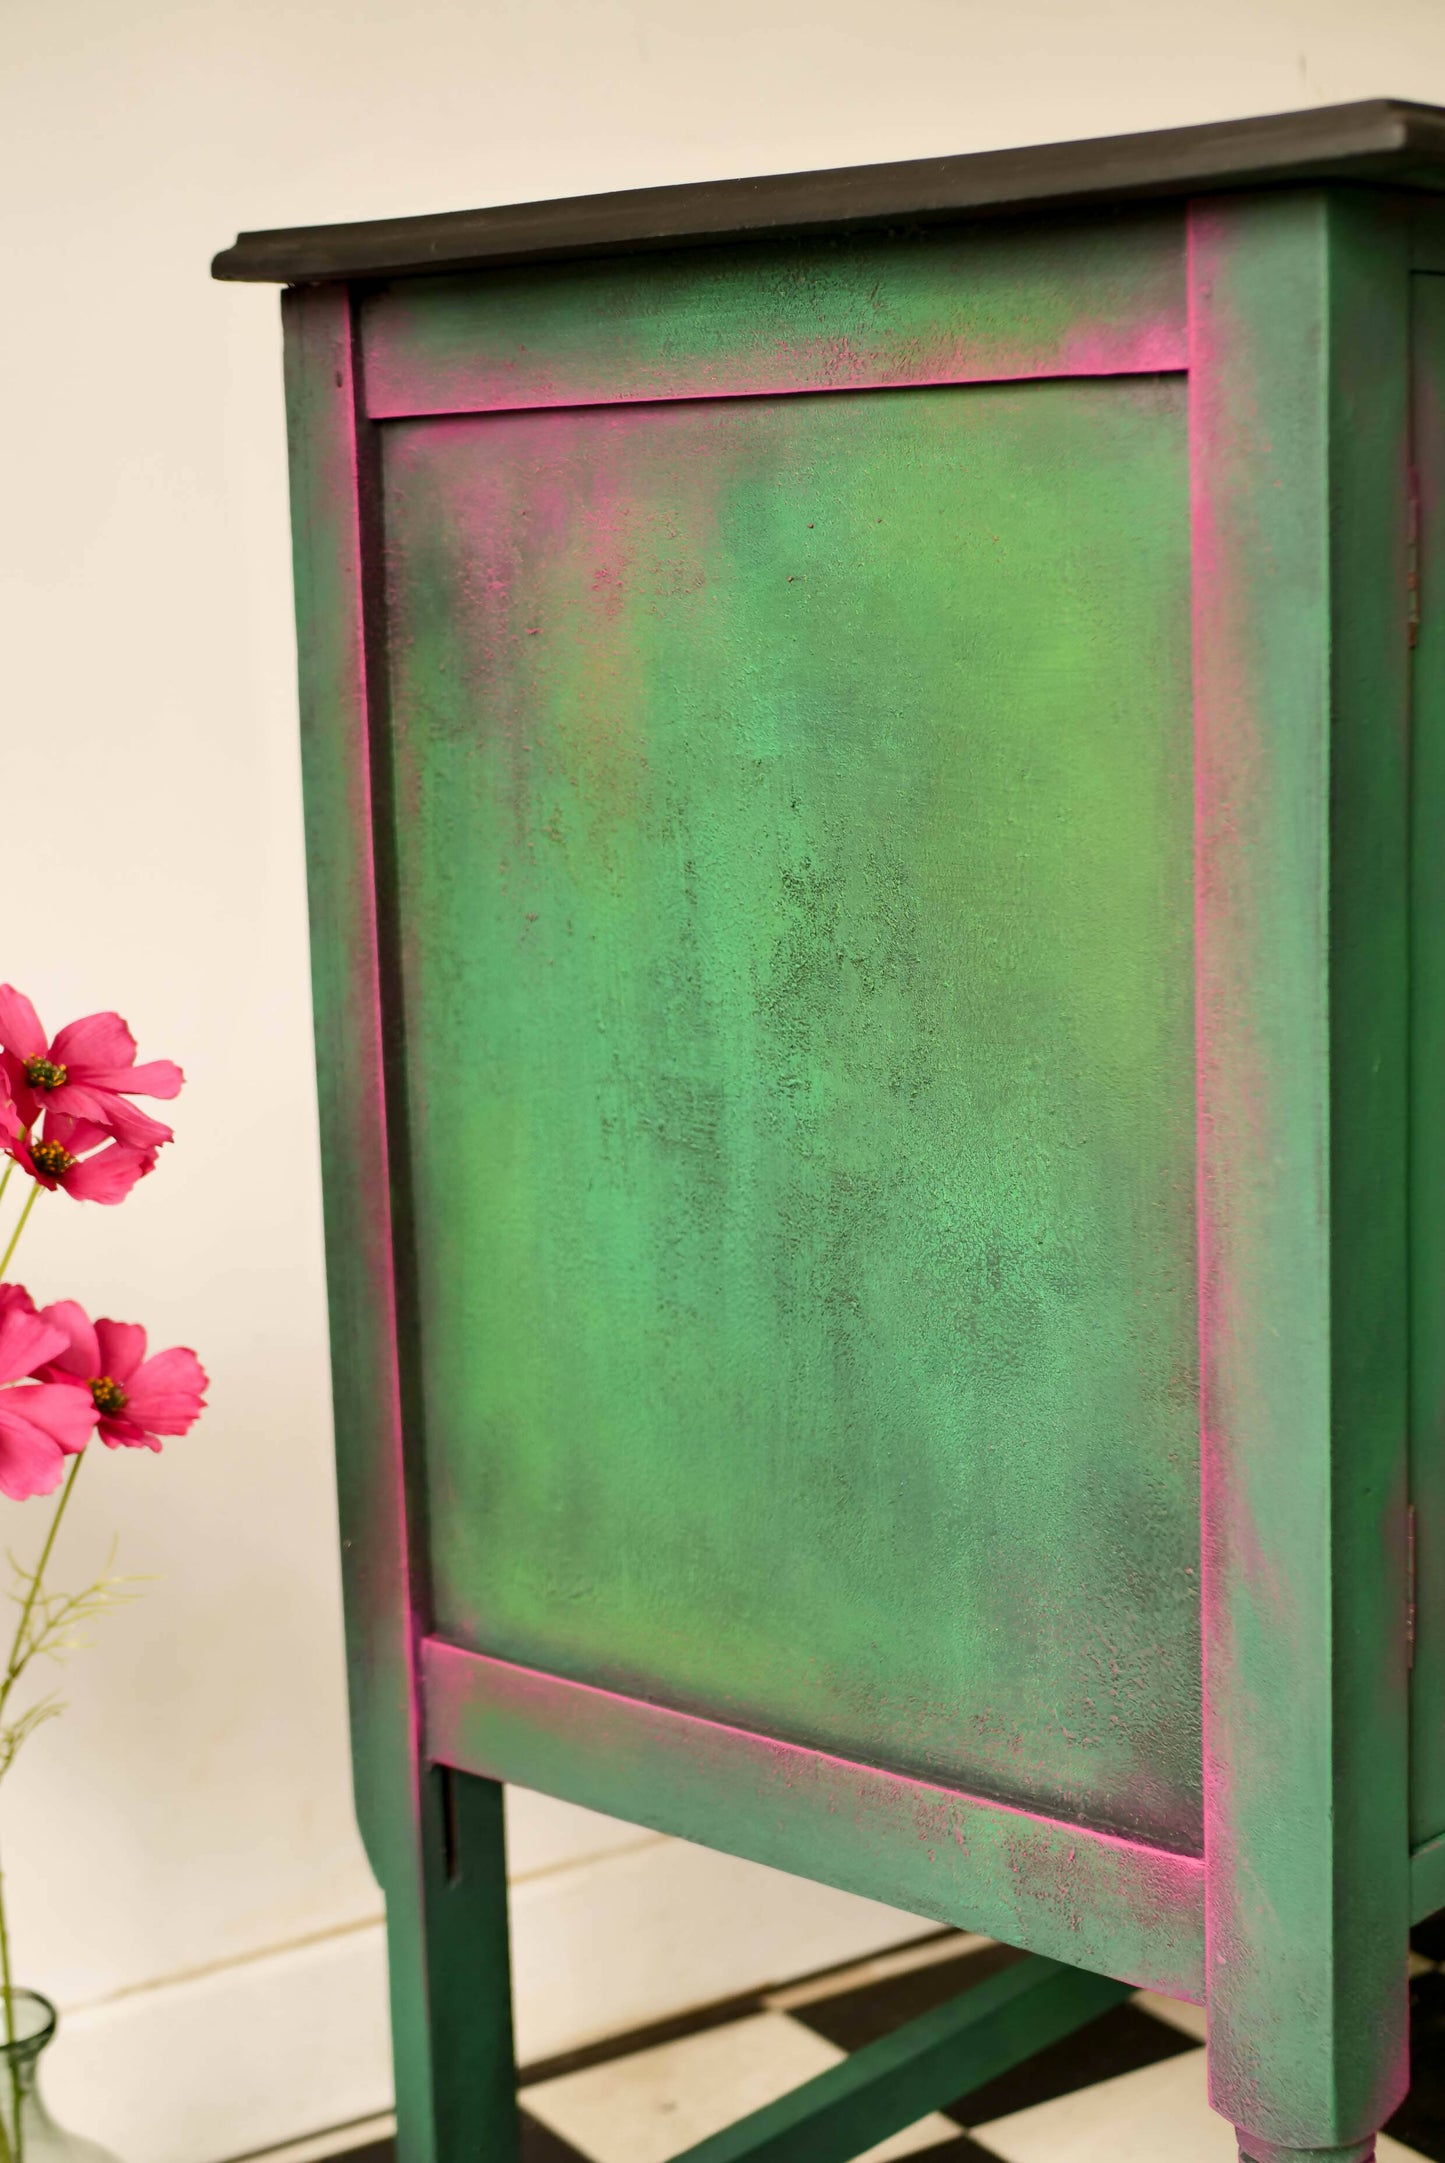 Oak Sideboard Green/ Pink - Spacious sideboard- Hand Painted Furniture - Living Room -Unique cabinet - Bespoke - Wood - Carved Wood - Unique